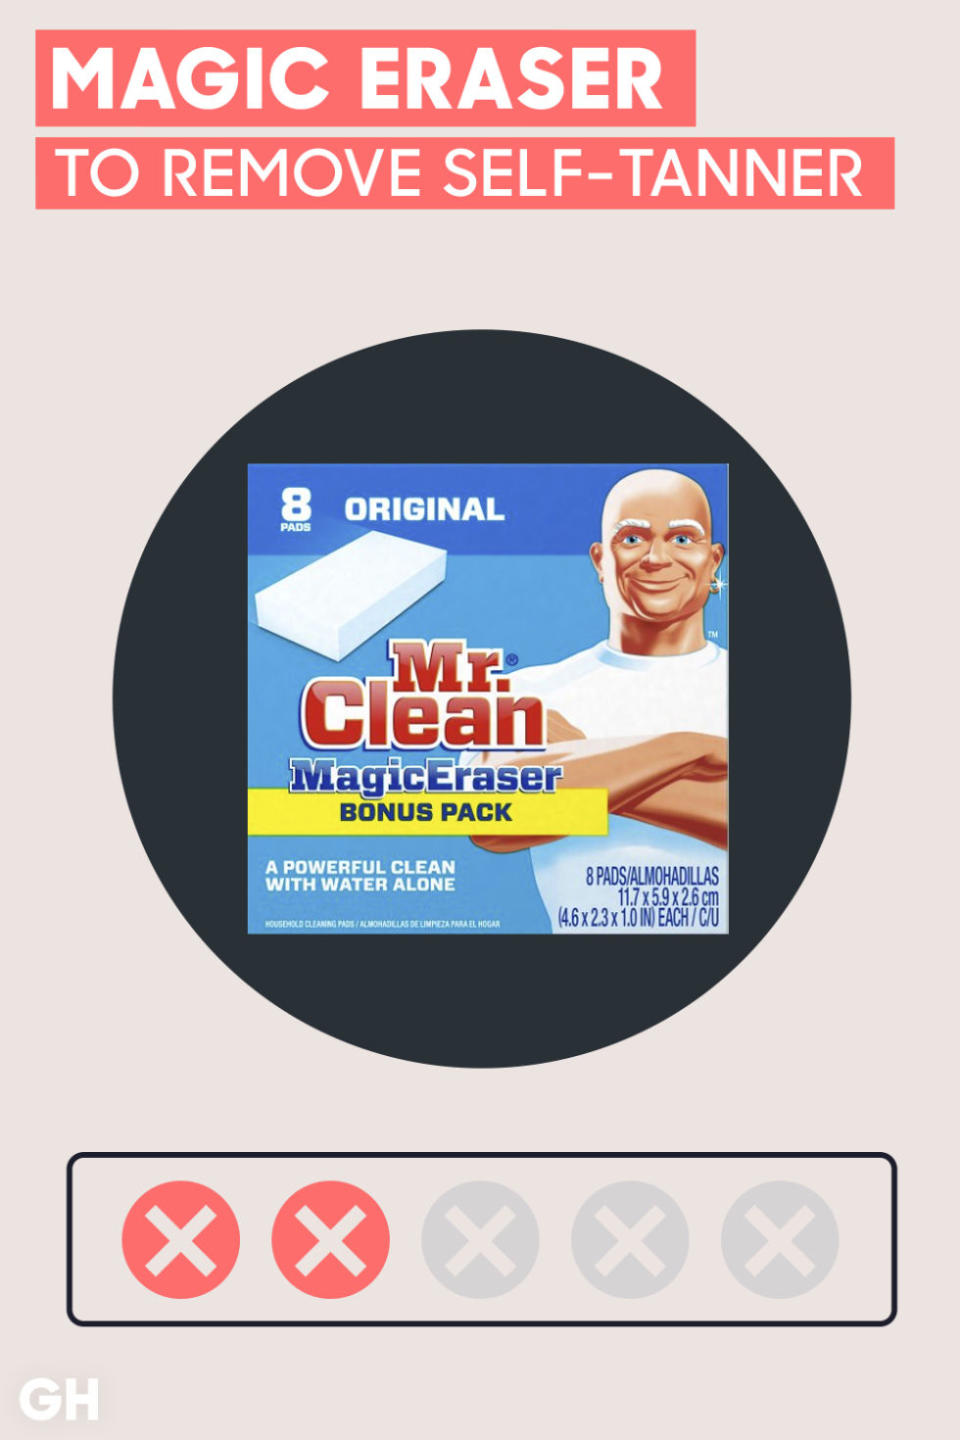 Using the Mr. Clean Magic Eraser to remove self-tanner.